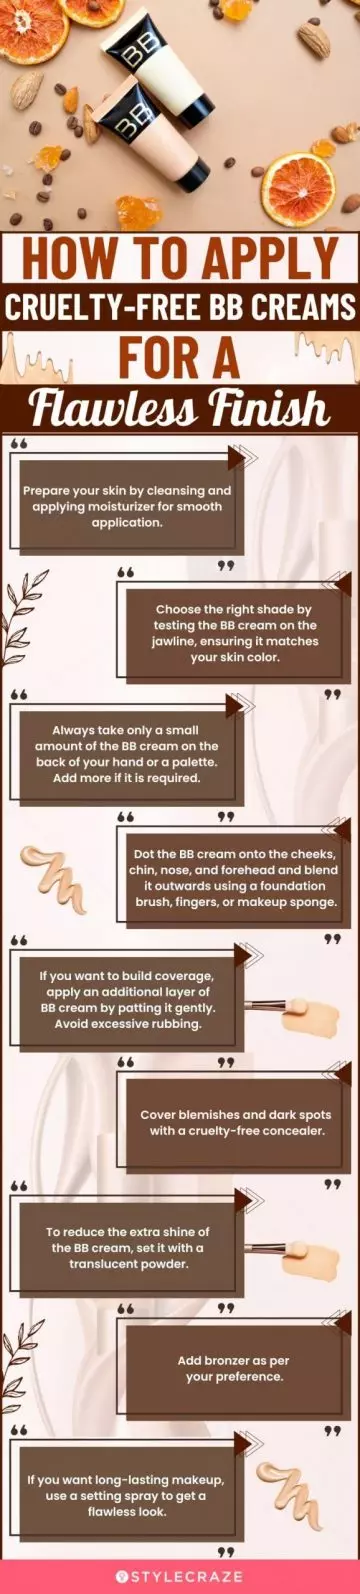 How To Apply Cruelty Free BB Cream For A Flawless Finish